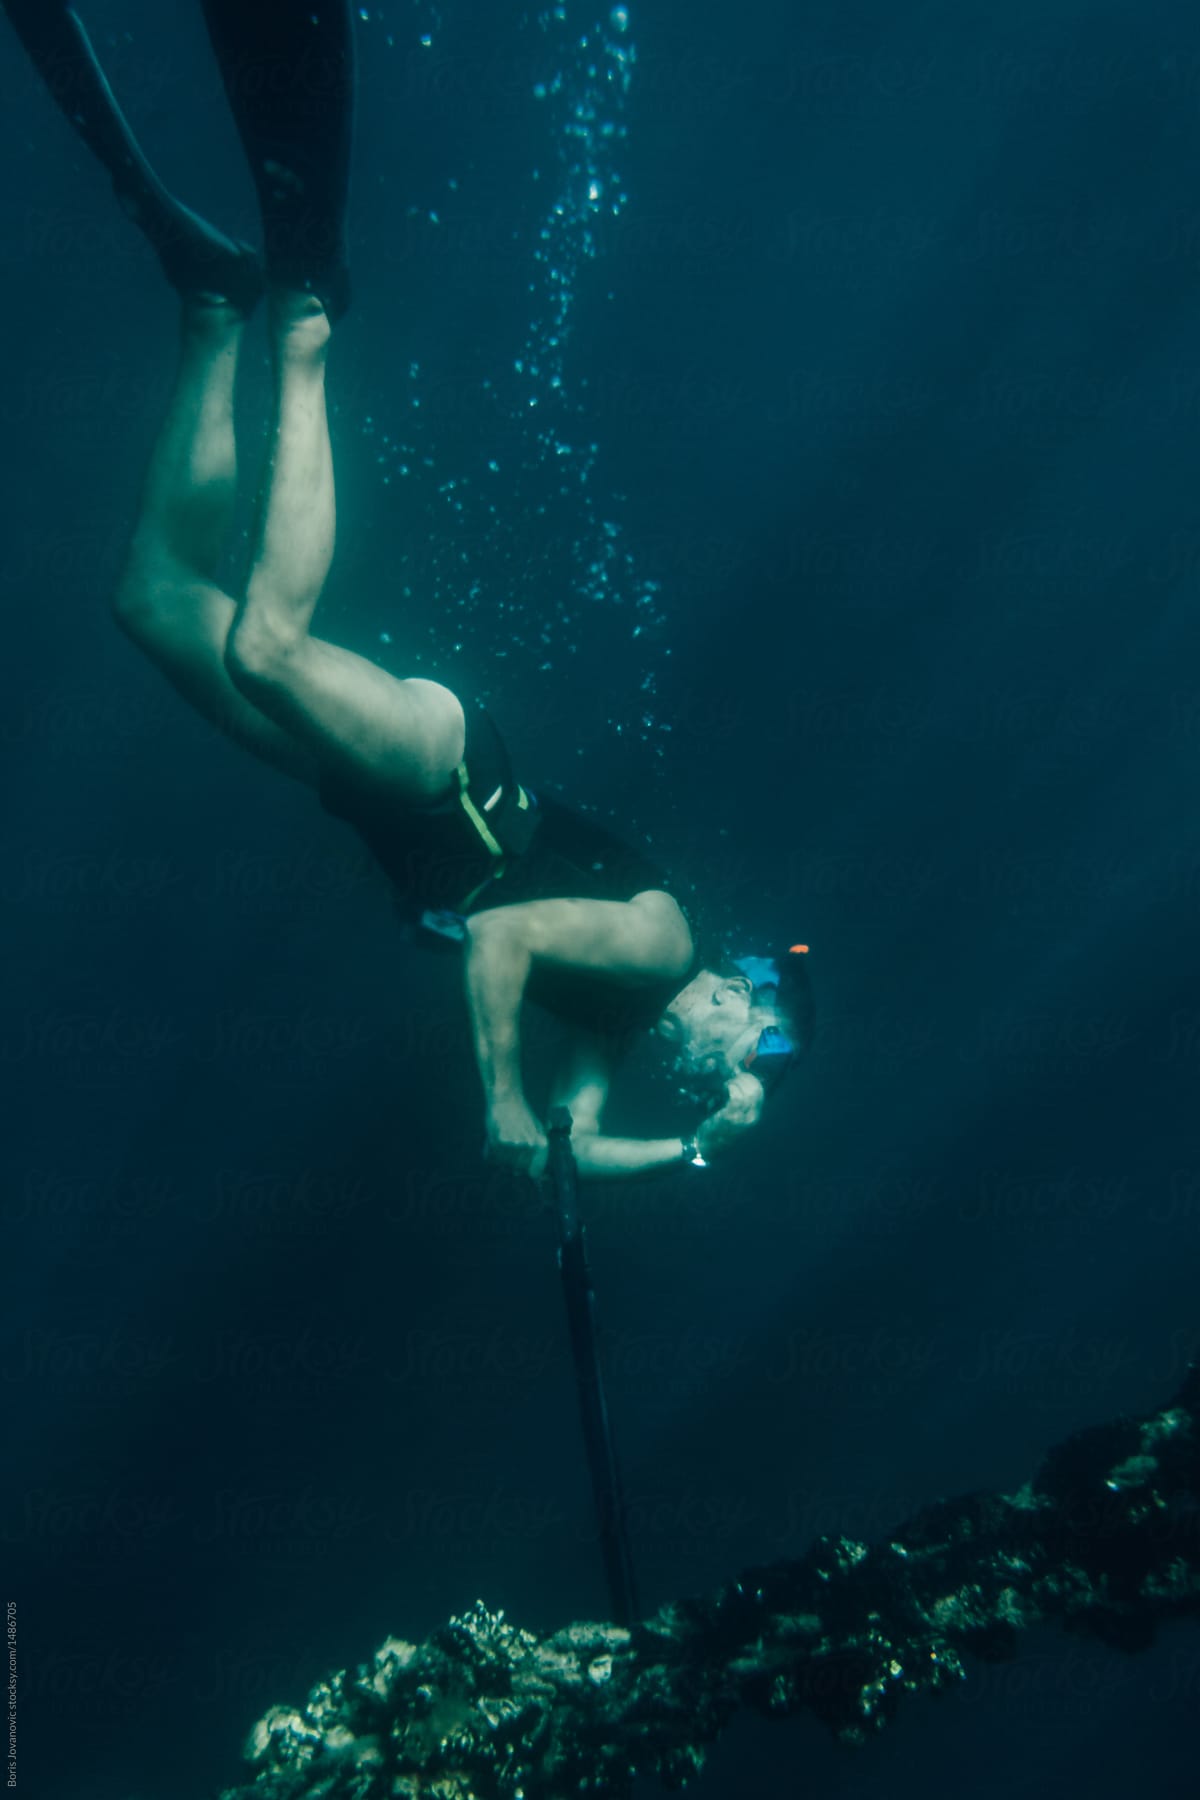 Diver hunting with underwater spear gun